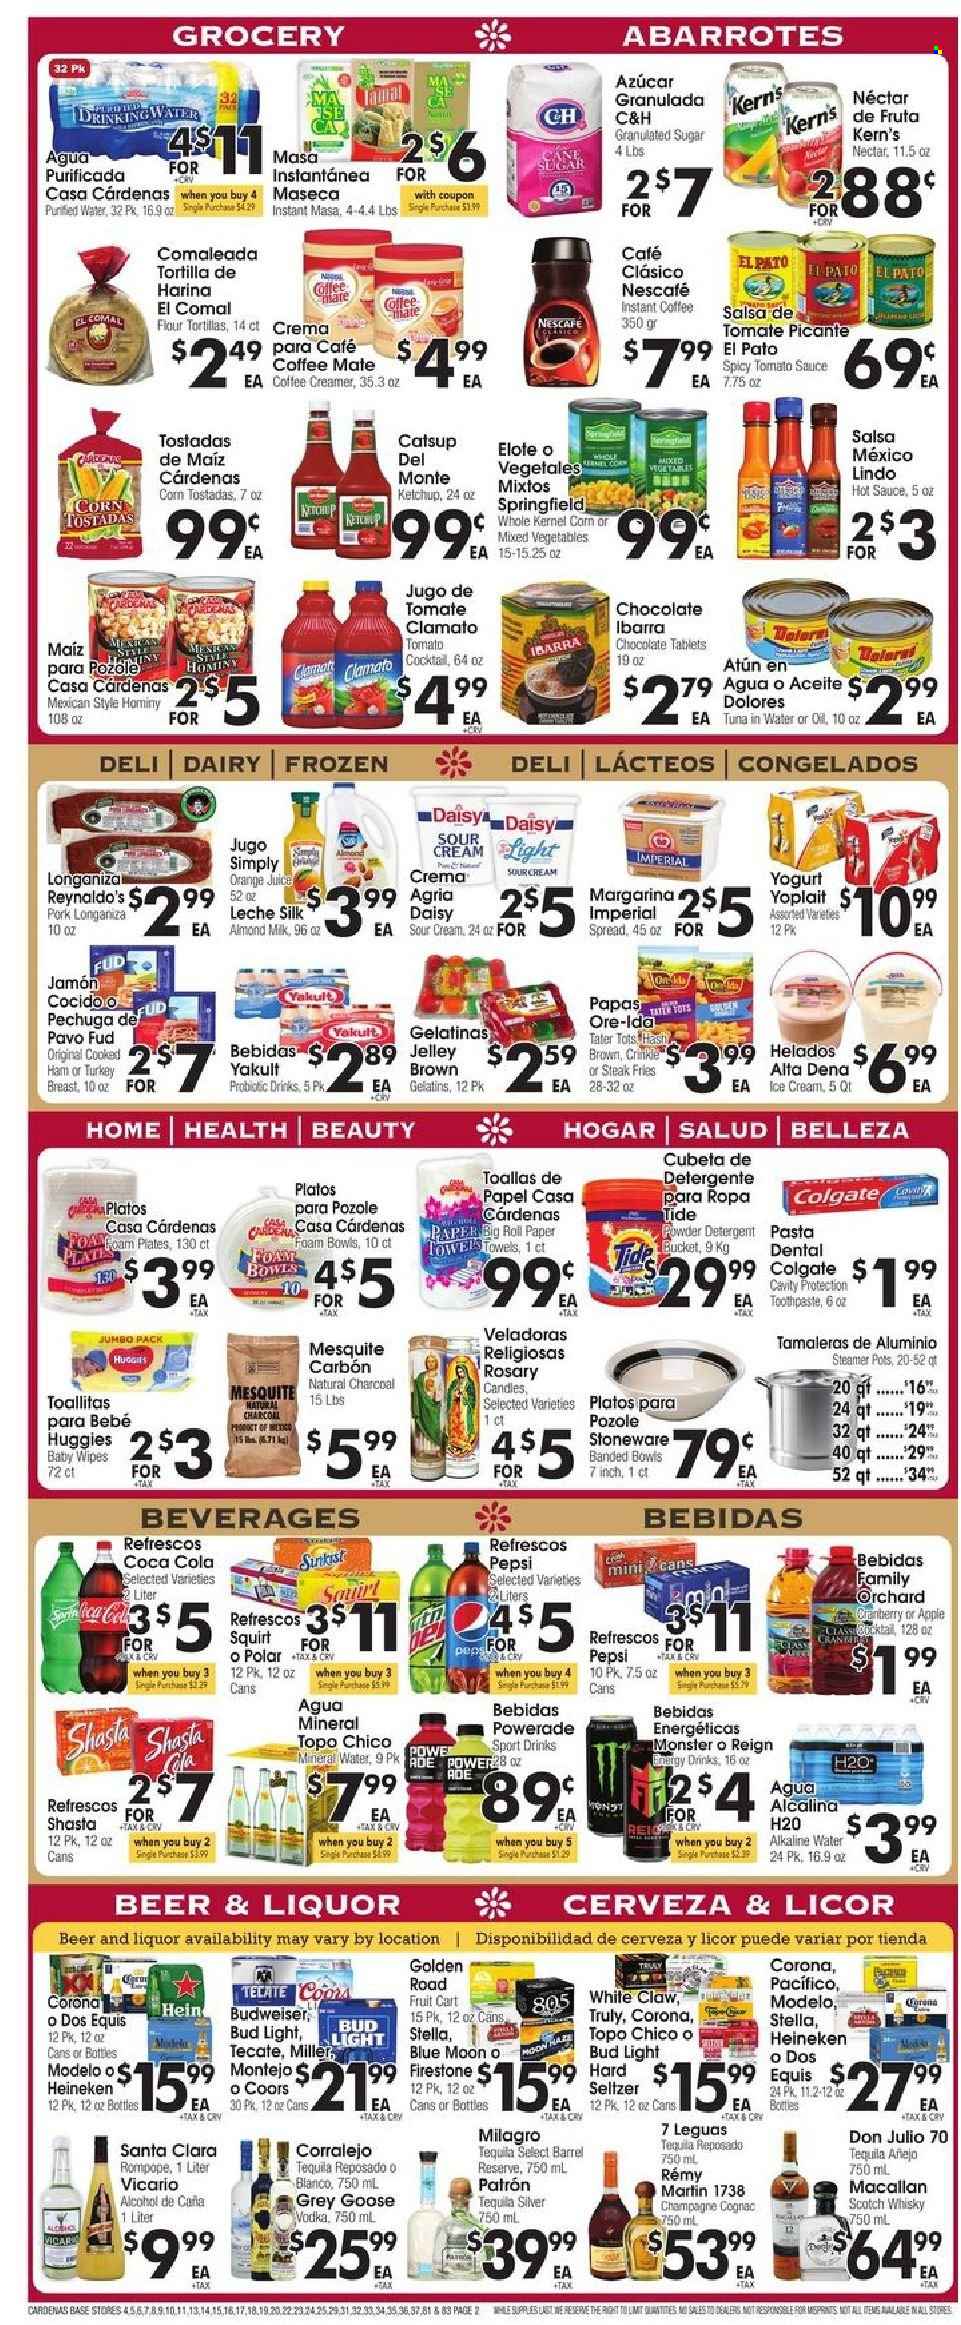 thumbnail - Cardenas Flyer - 01/05/2022 - 01/11/2022 - Sales products - tortillas, tostadas, corn, tuna, pasta, cooked ham, ham, yoghurt, Yoplait, Coffee-Mate, milk, Silk, sour cream, creamer, mixed vegetables, potato fries, Ore-Ida, tater tots, chocolate, corn tostadas, cane sugar, granulated sugar, sugar, tomato sauce, tuna in water, hot sauce, ketchup, salsa, Coca-Cola, Powerade, Pepsi, orange juice, juice, Monster, Clamato, Kern's, mineral water, purified water, alkaline water, instant coffee, Nescafé, champagne, alcohol, cognac, tequila, vodka, liquor, Rémy Martin, Hard Seltzer, TRULY, scotch whisky, whisky, beer, Bud Light, Corona Extra, Heineken, Miller, Modelo, turkey breast, steak, wipes, Huggies, baby wipes, paper towels, detergent, Tide, Colgate, toothpaste, tray, plate, pot, stoneware, candle, veladoras religiosas, foam plates, Budweiser, Coors, Dos Equis, Blue Moon. Page 2.